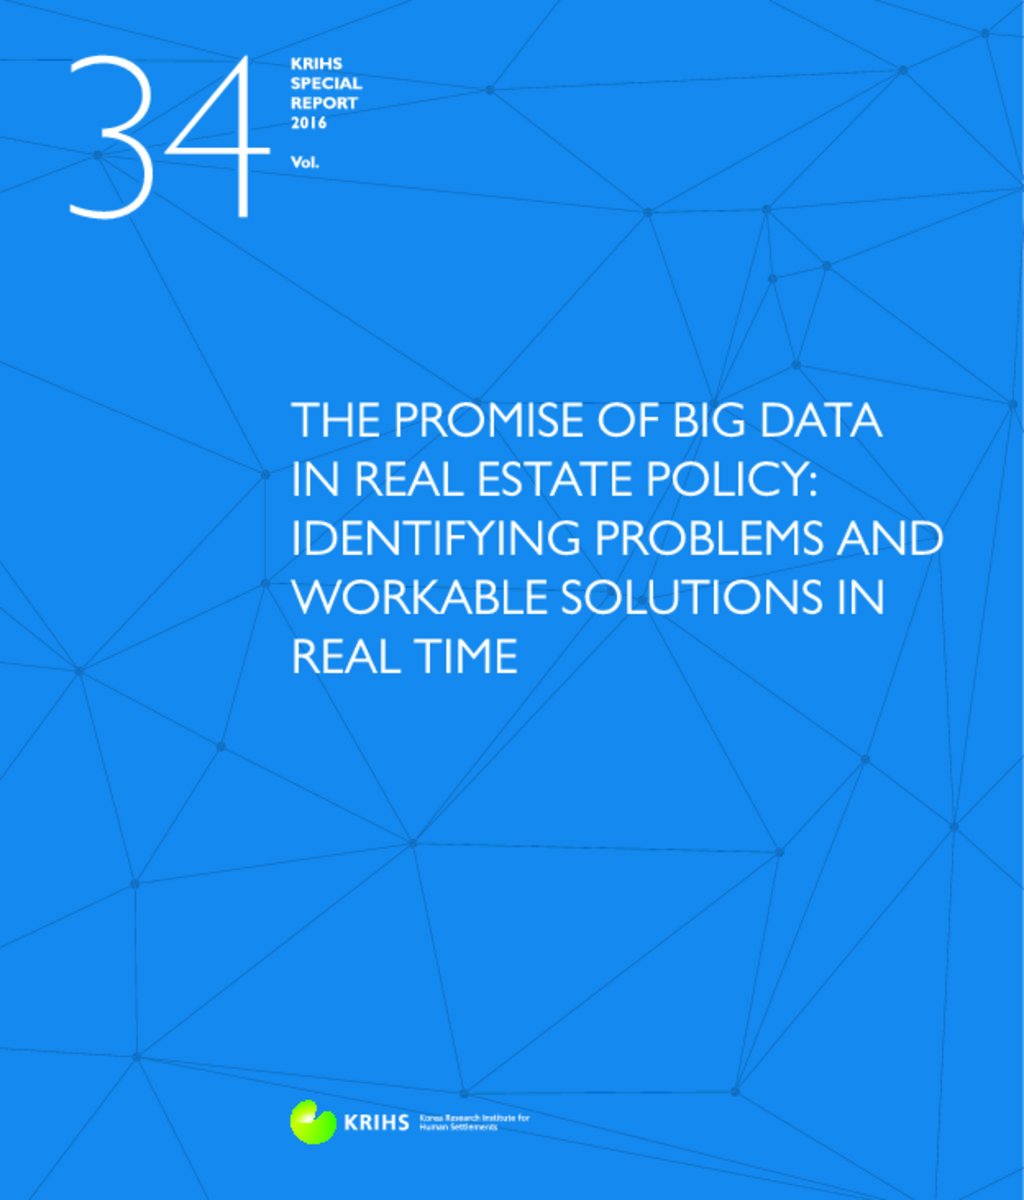 The promise of Big Data in Real Estate Policy